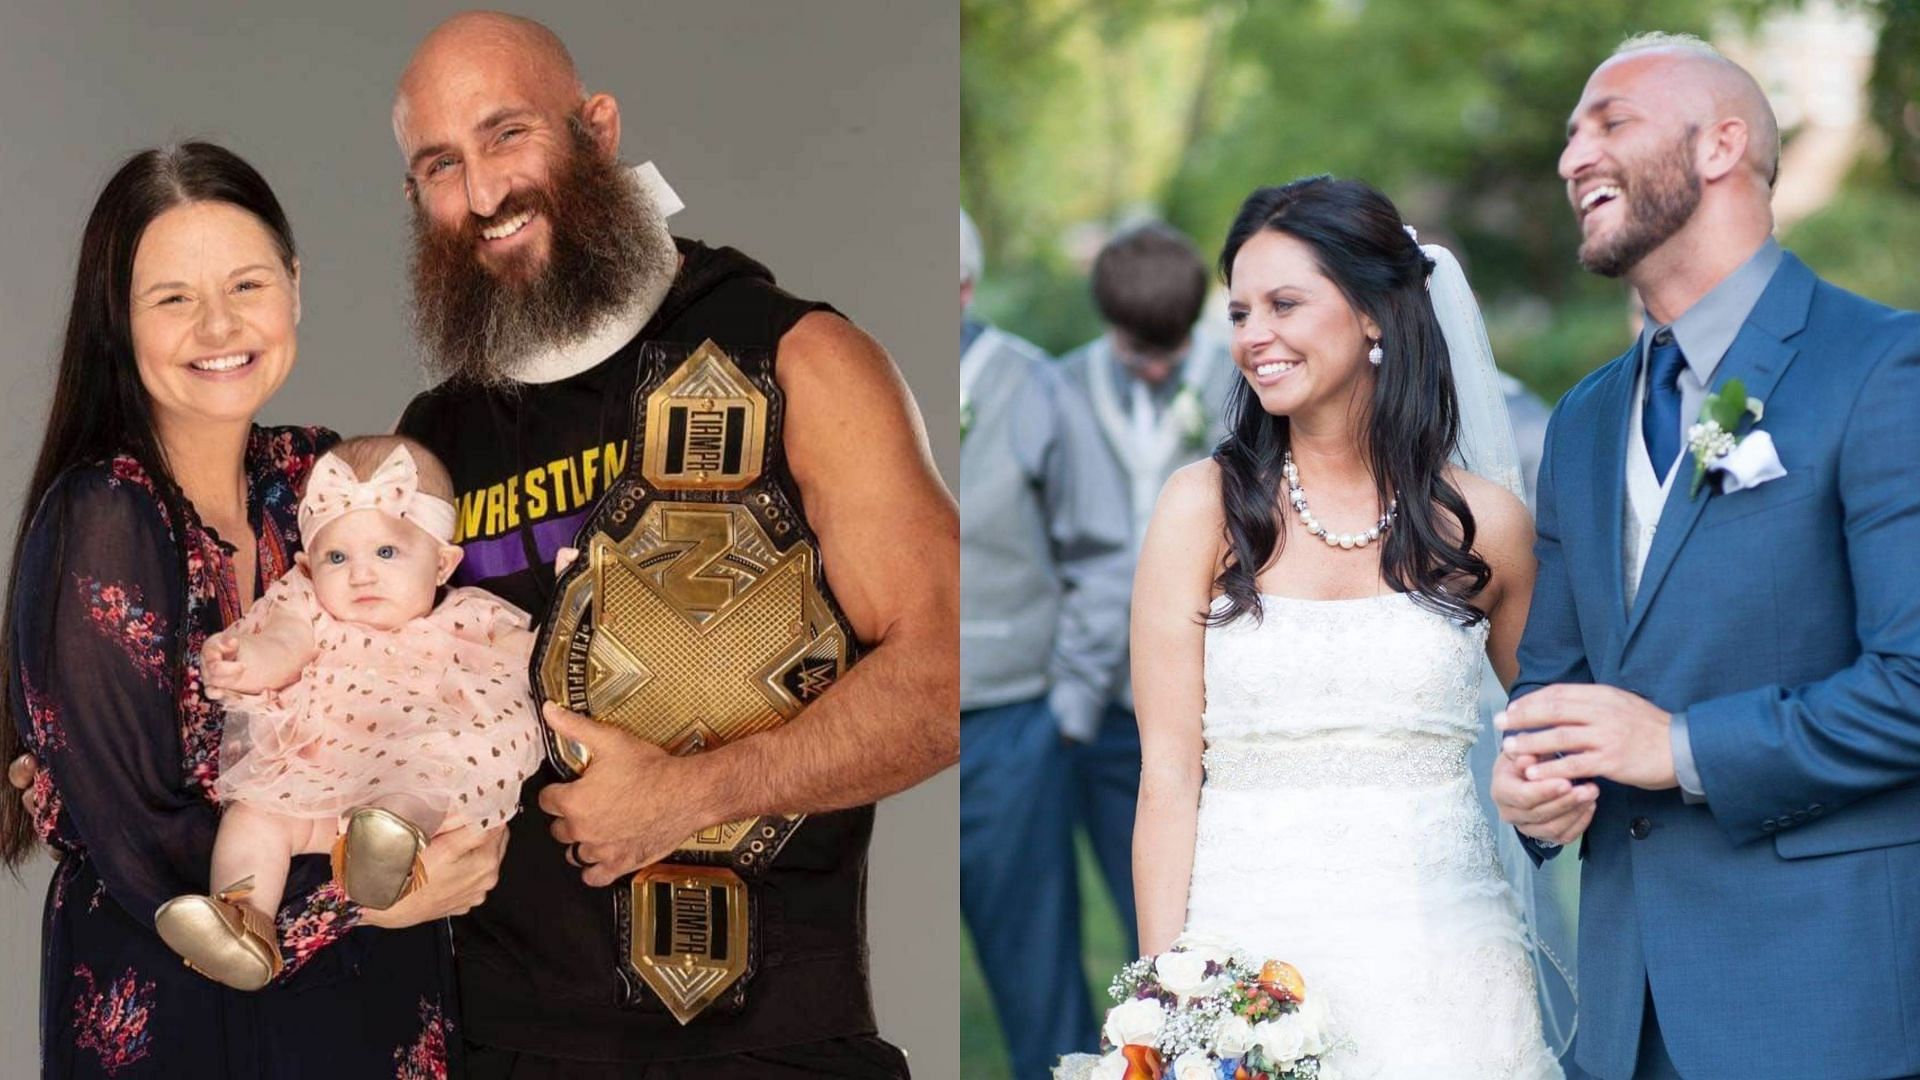 Ciampa with his wife, former WWE producer Jessie Ward